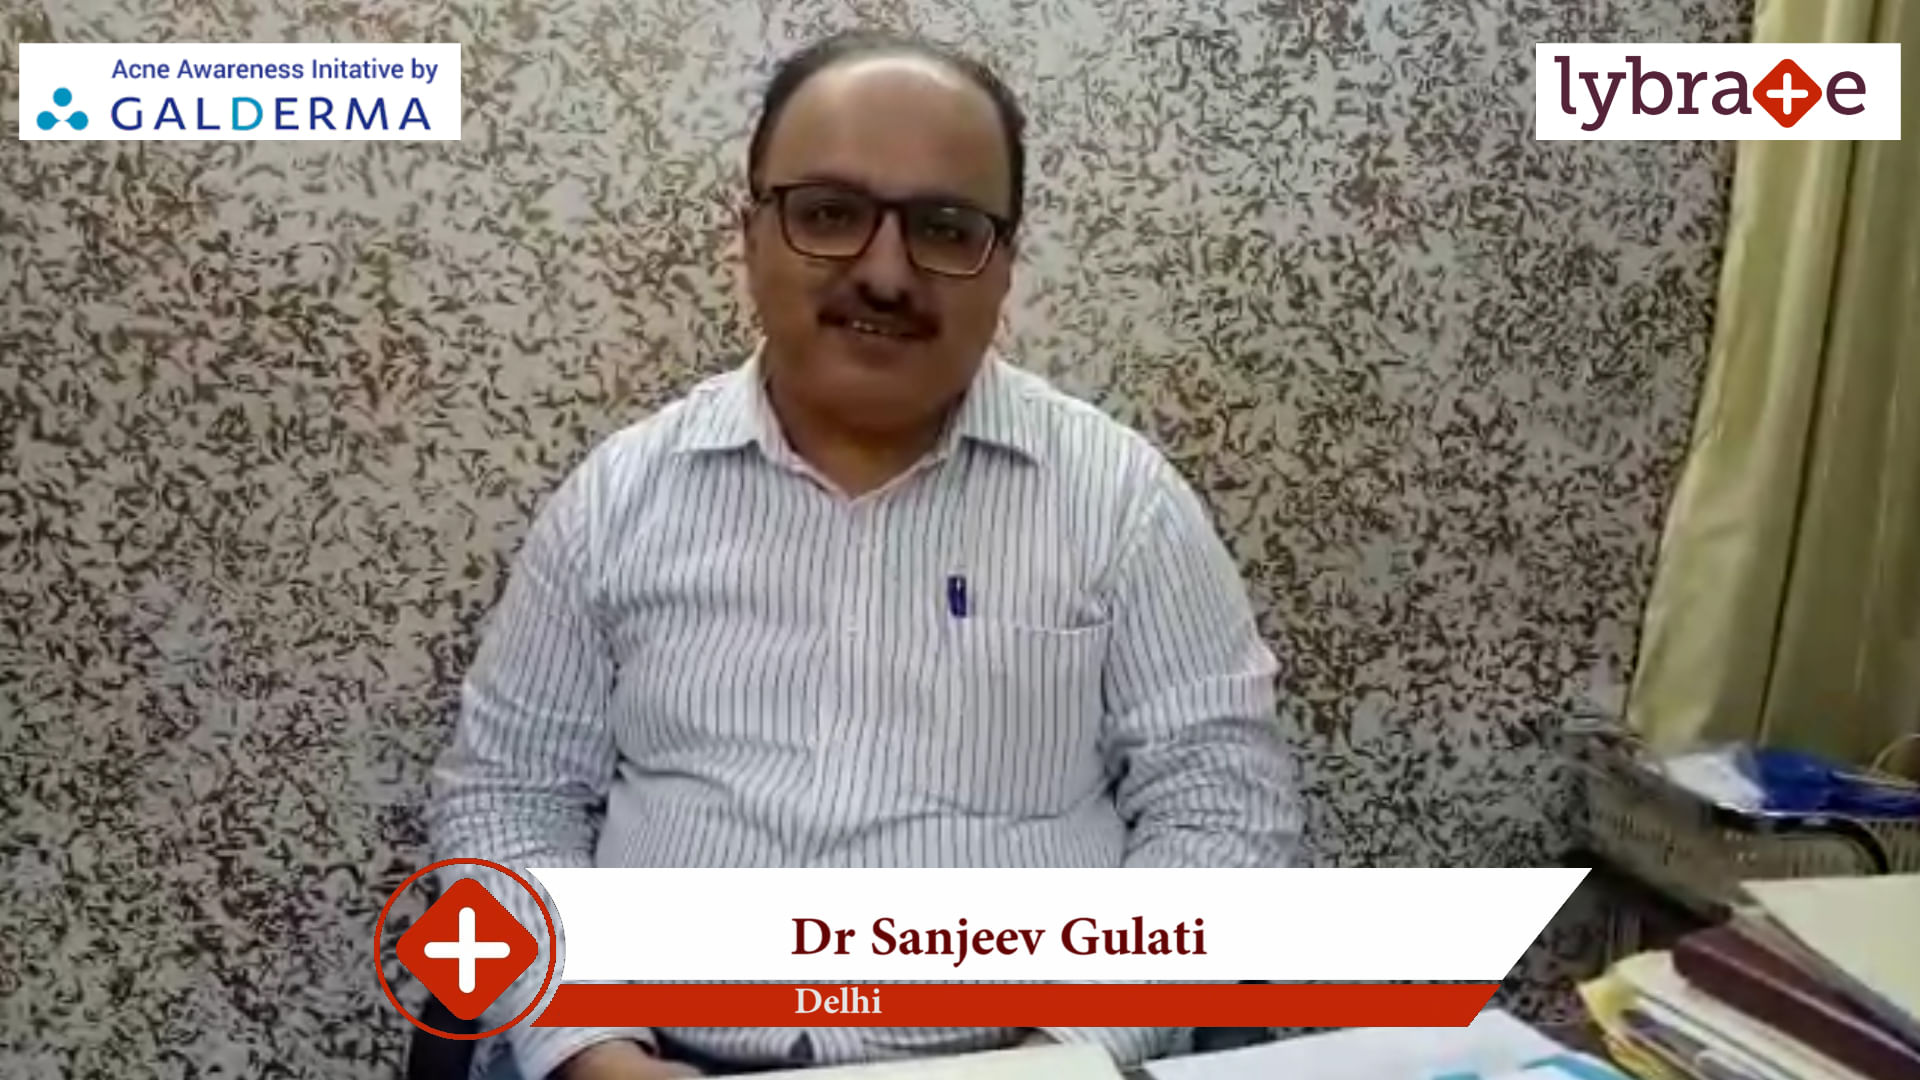 Lybrate | Dr. Sanjeev Gulati speaks on IMPORTANCE OF TREATING ACNE EARLY